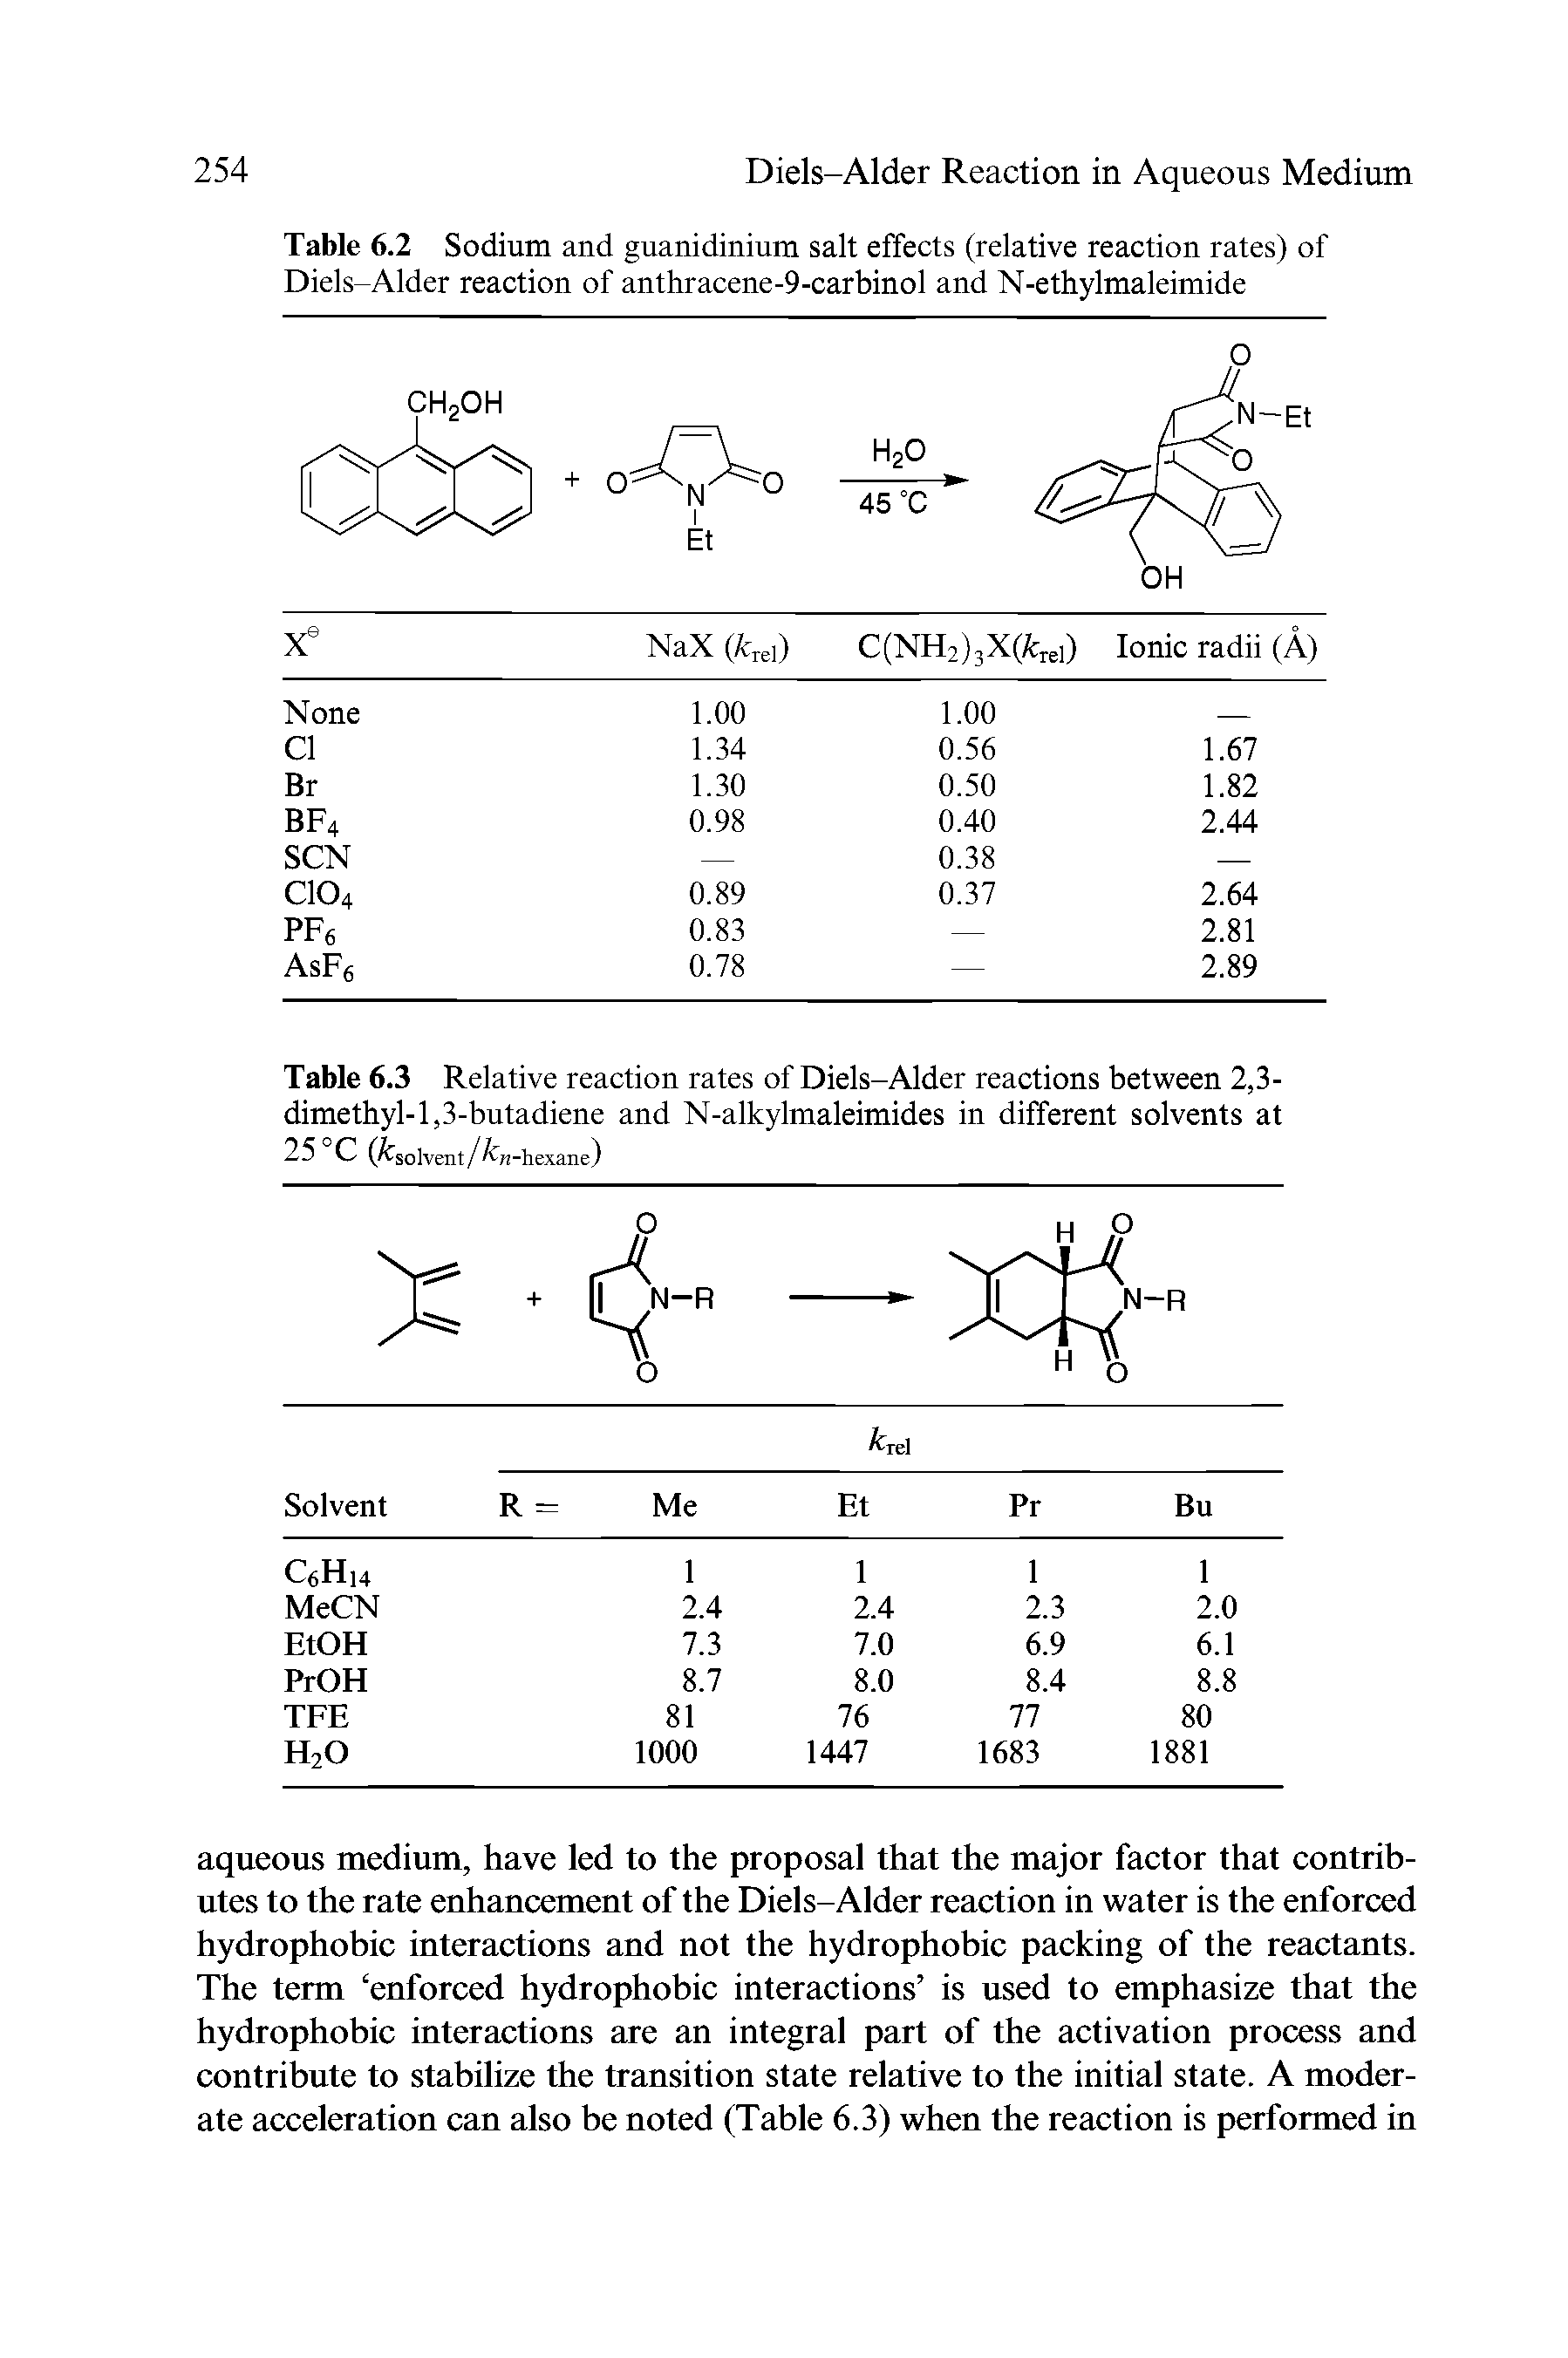 Table 6.2 Sodium and guanidinium salt effects (relative reaction rates) of Diels-Alder reaction of anthracene-9-carbinol and N-ethylmaleimide...